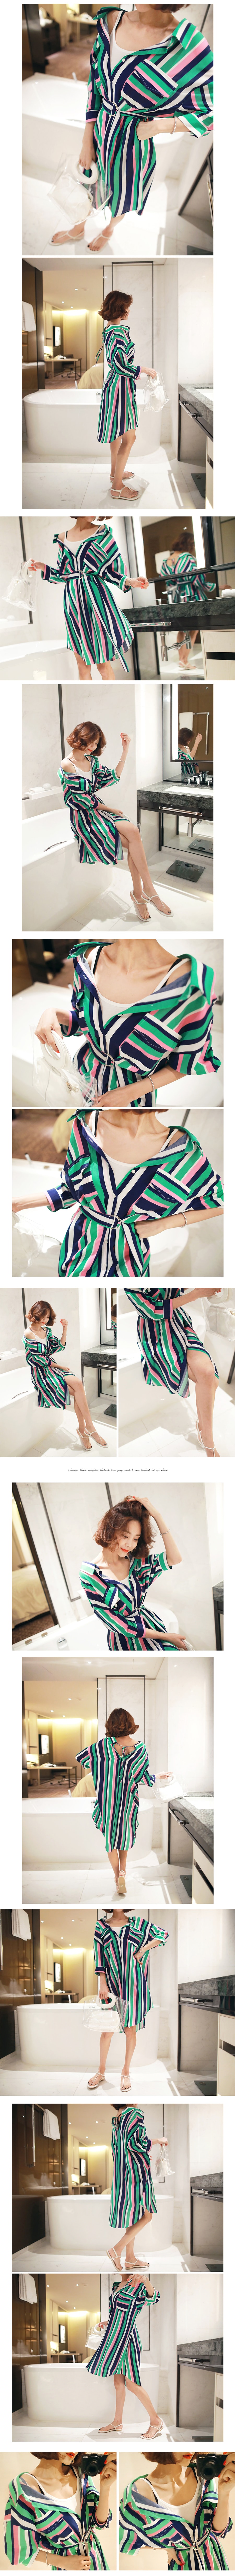 KOREA Oversized Color-Block Shirt Dress with Belt #Green+Pink One Size(Free) [Free Shipping]